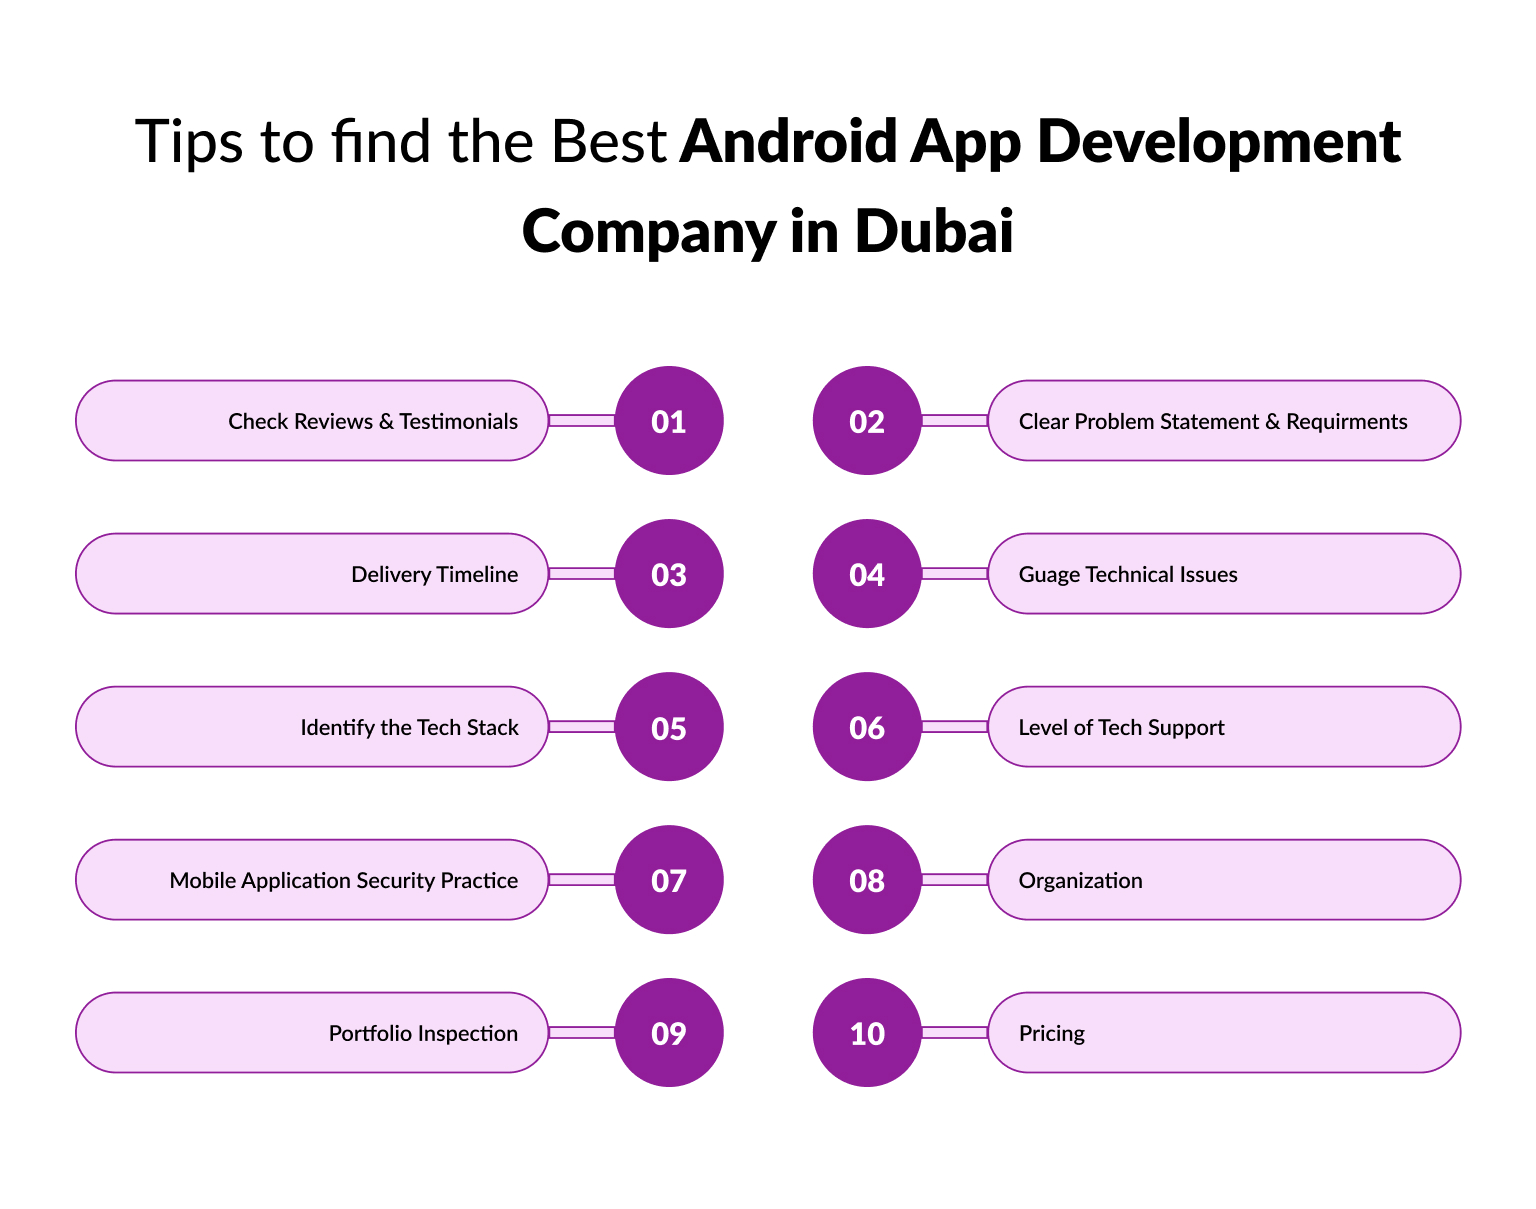 Tips to find the Best Android App Development Company in Dubai